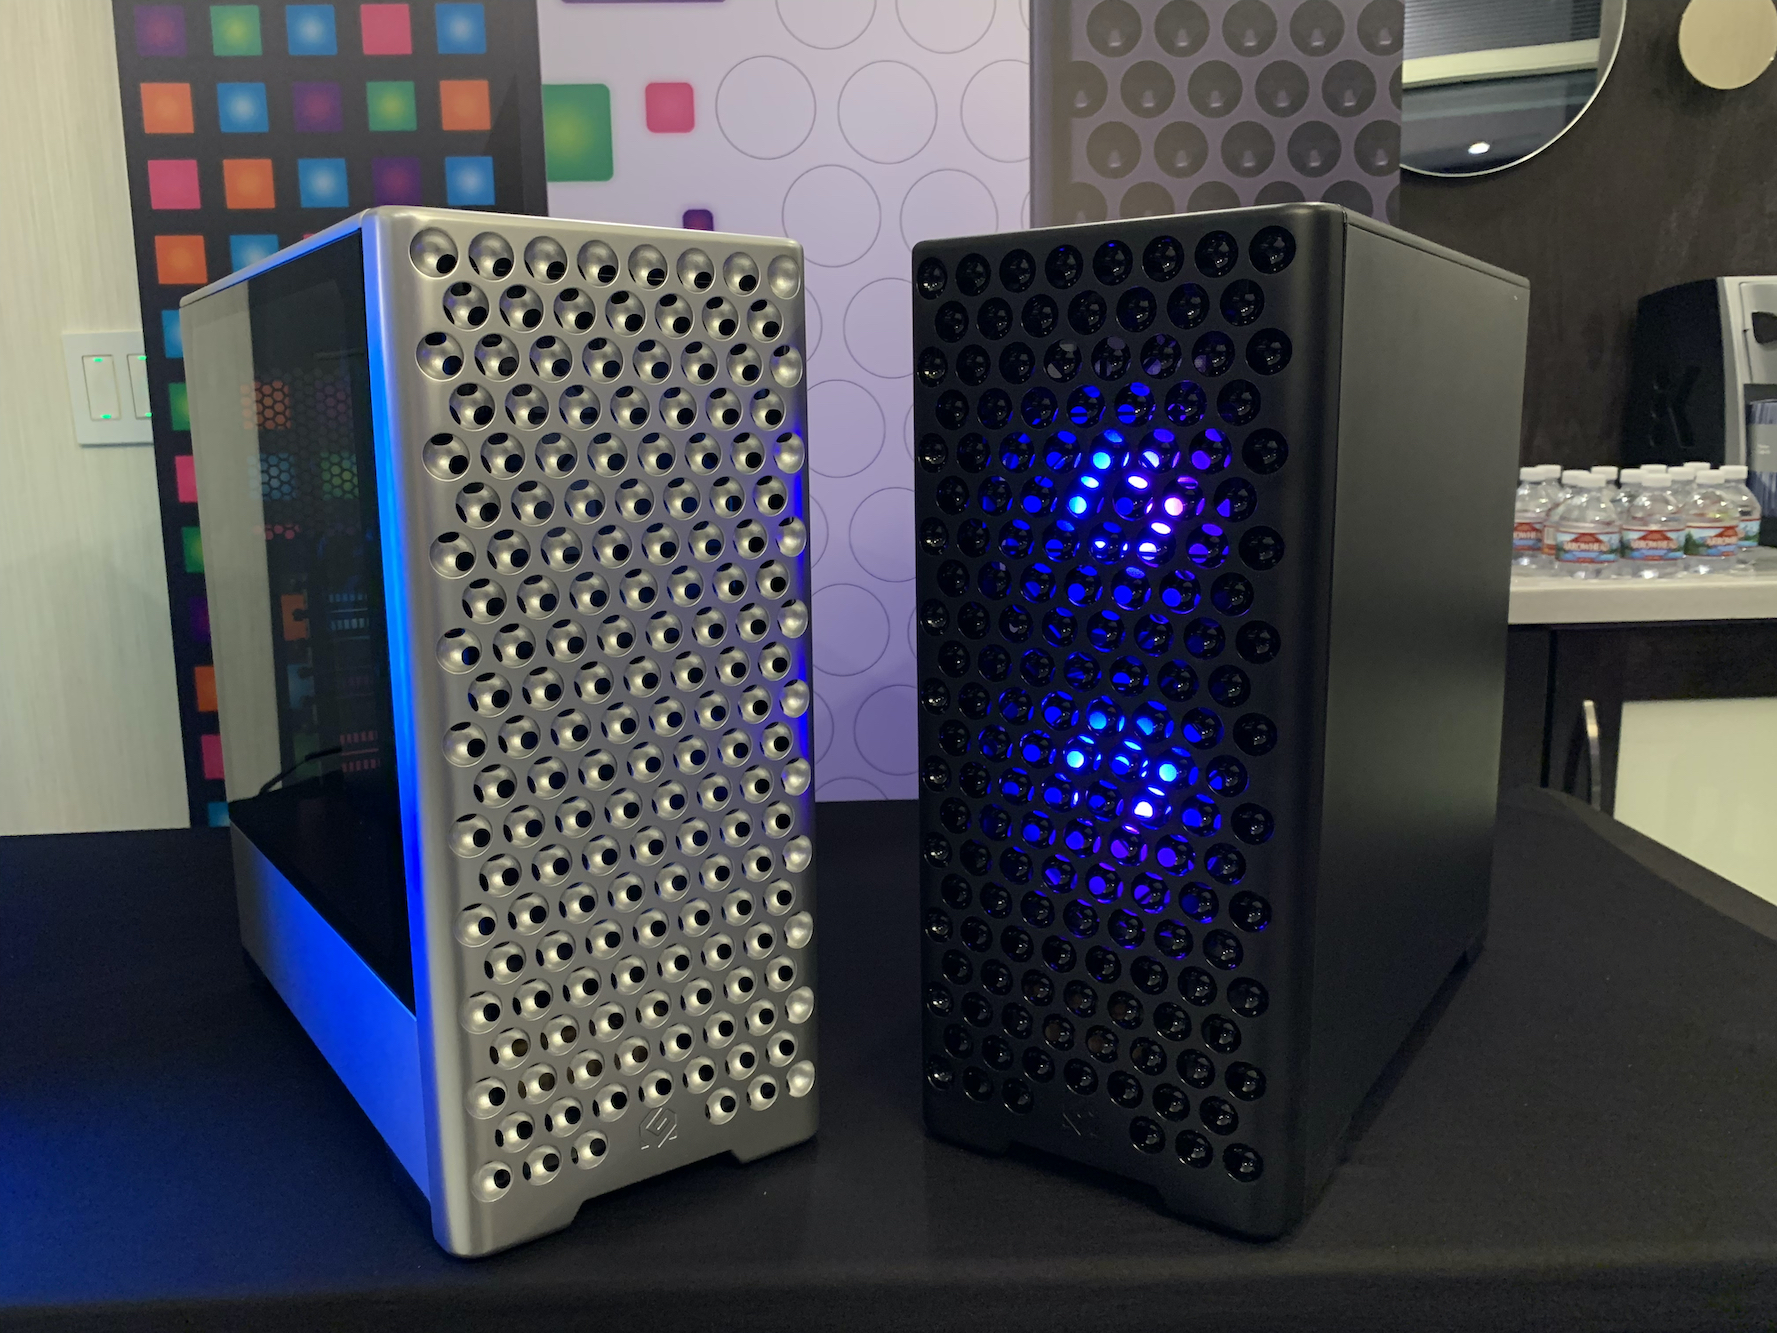 Want a $50k Mac Pro Cheese Grater? Get a $60 PC Cheese Grater!